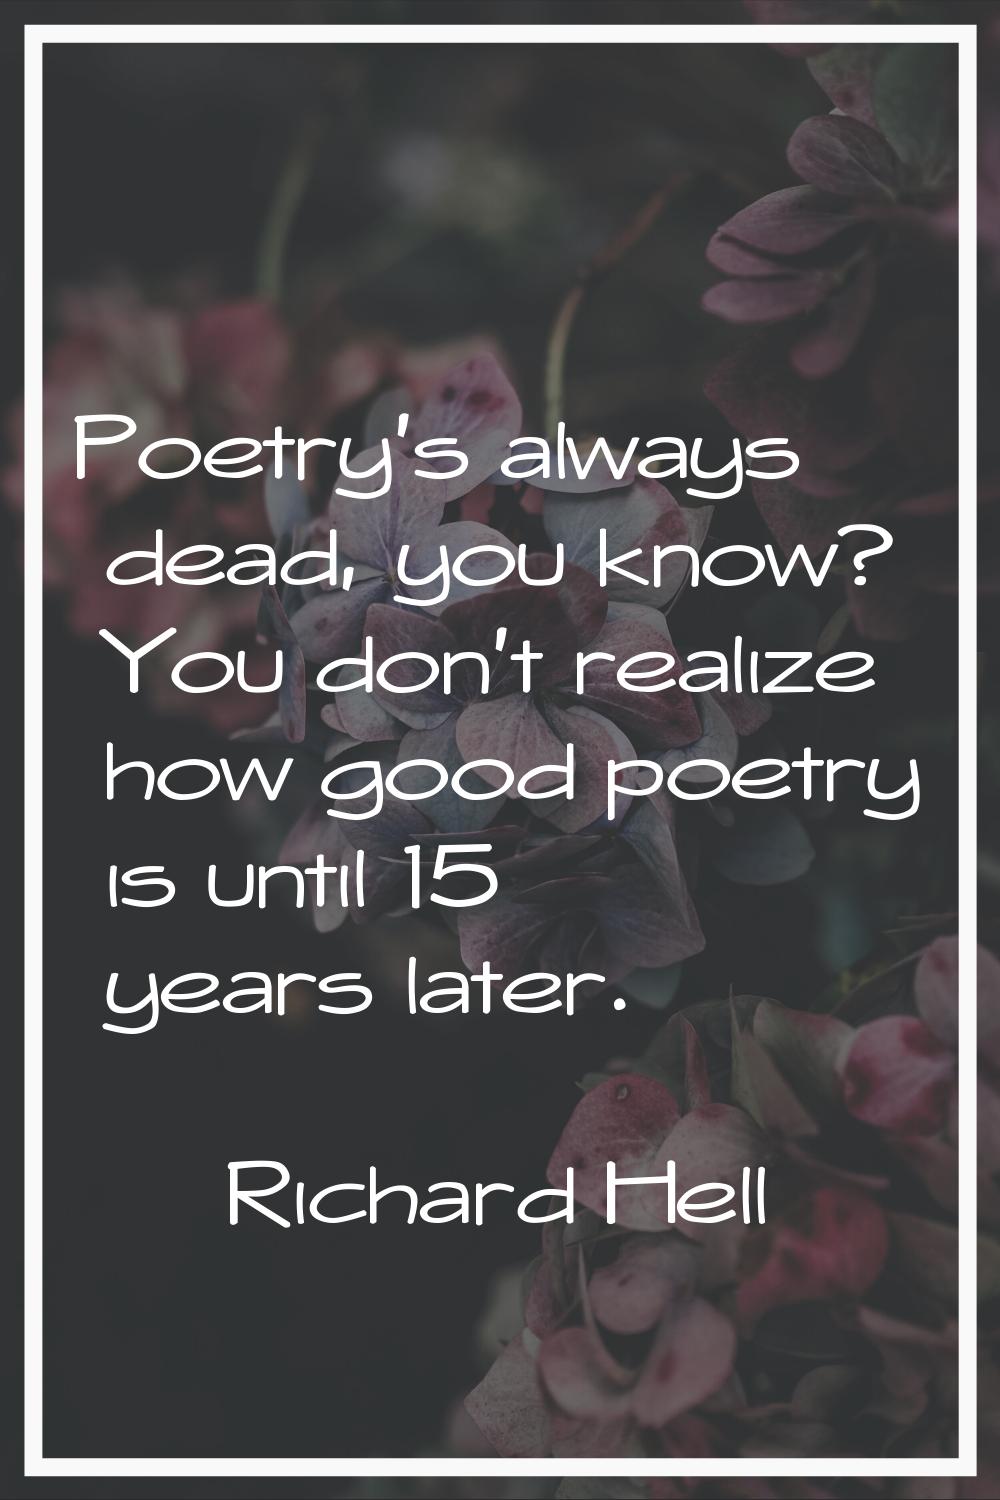 Poetry's always dead, you know? You don't realize how good poetry is until 15 years later.